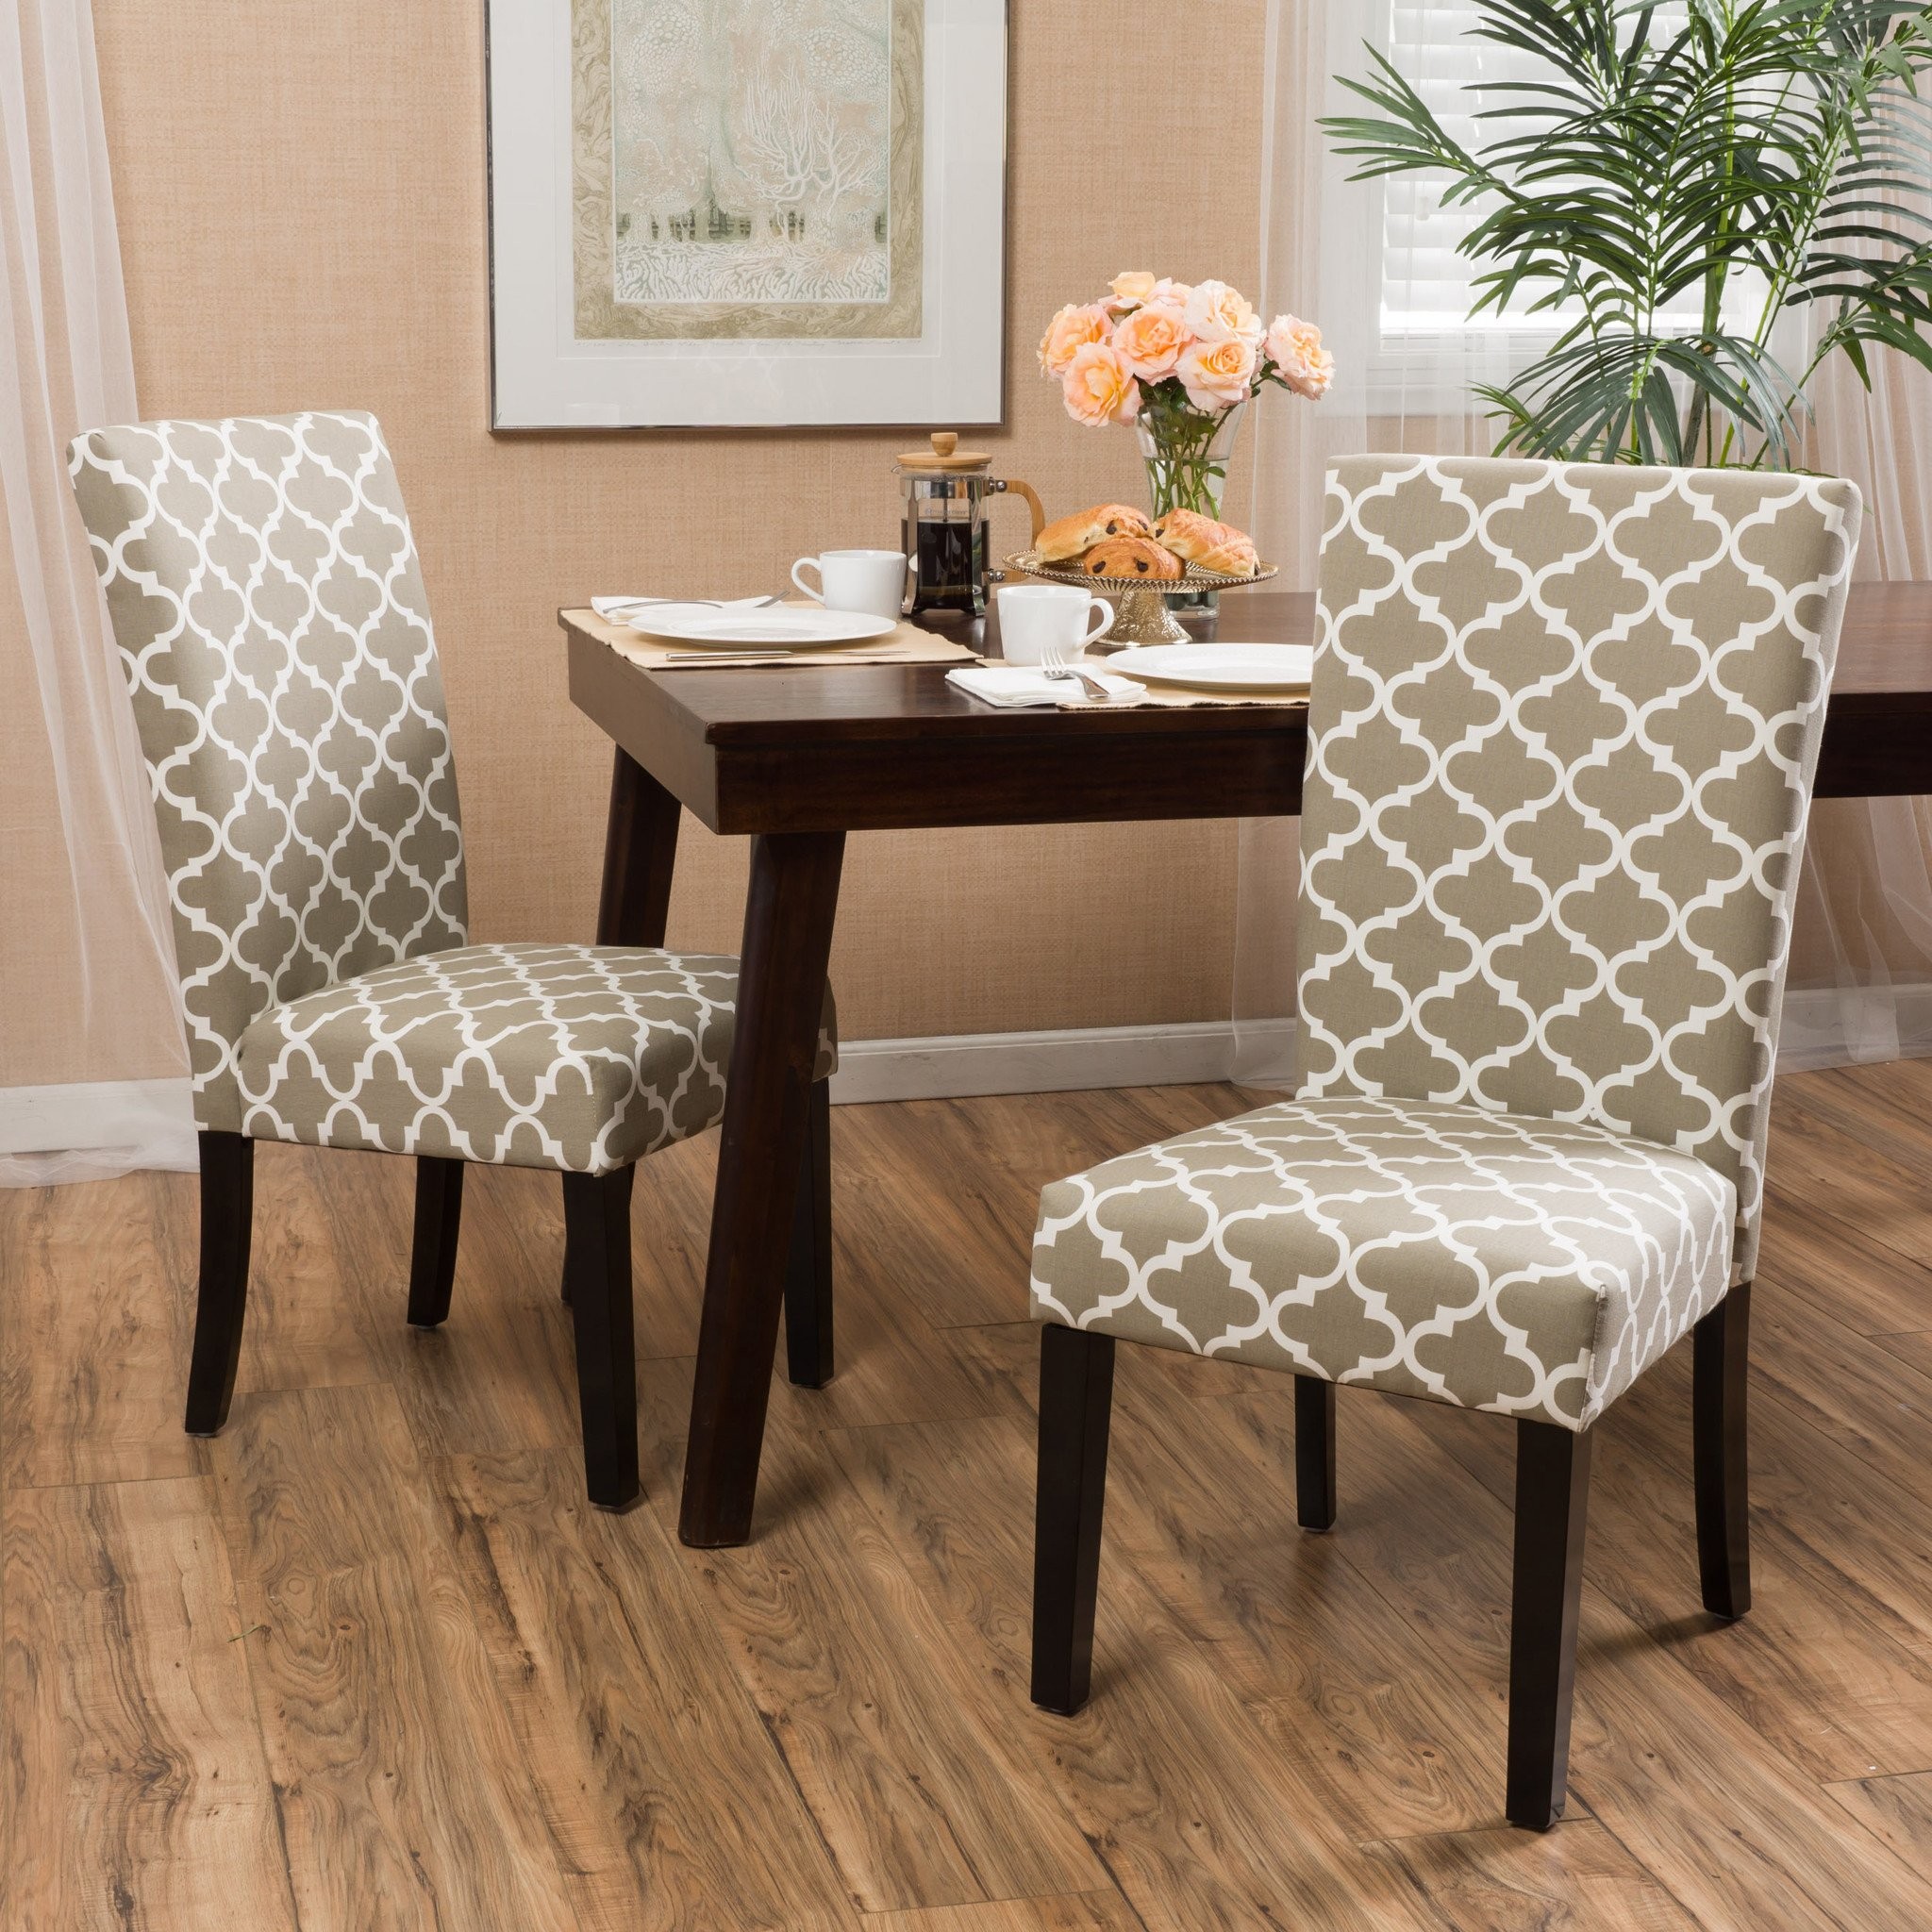 Raleigh Khaki Fabric Dining Chair Set of Two (2)